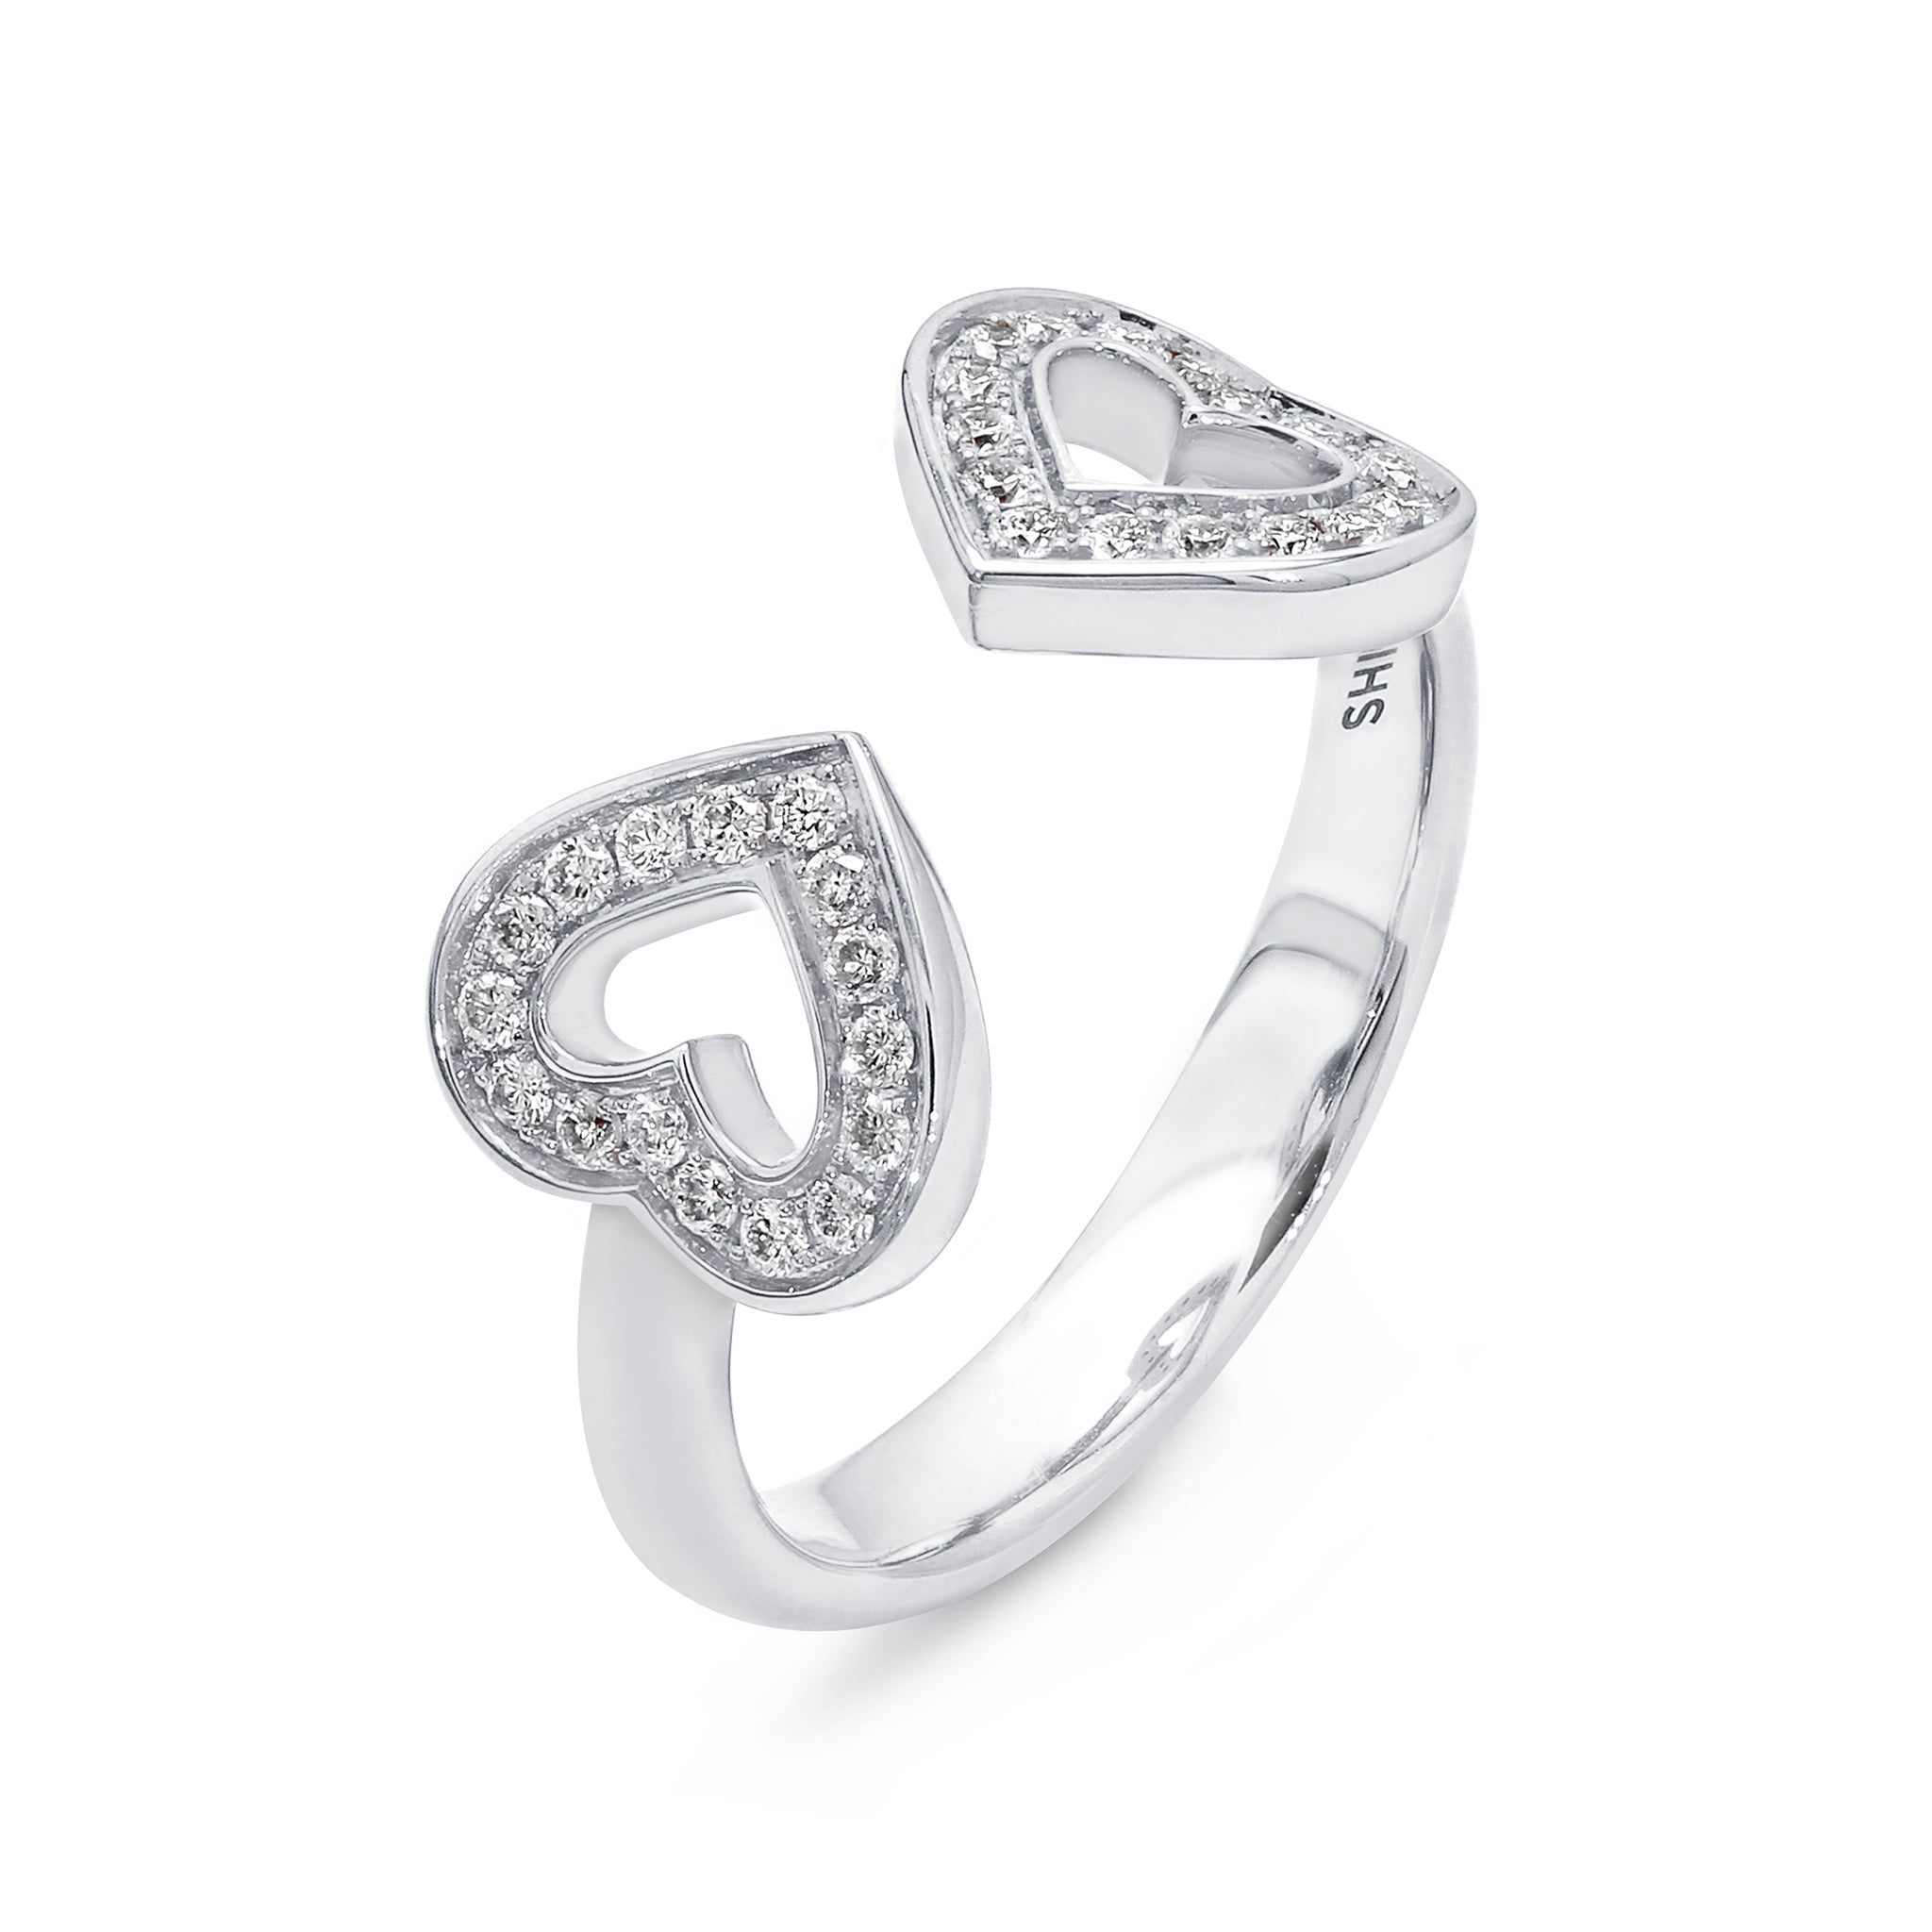 Shimansky - Two Hearts Open Diamond Pave Ring 0.20ct in 18K White Gold